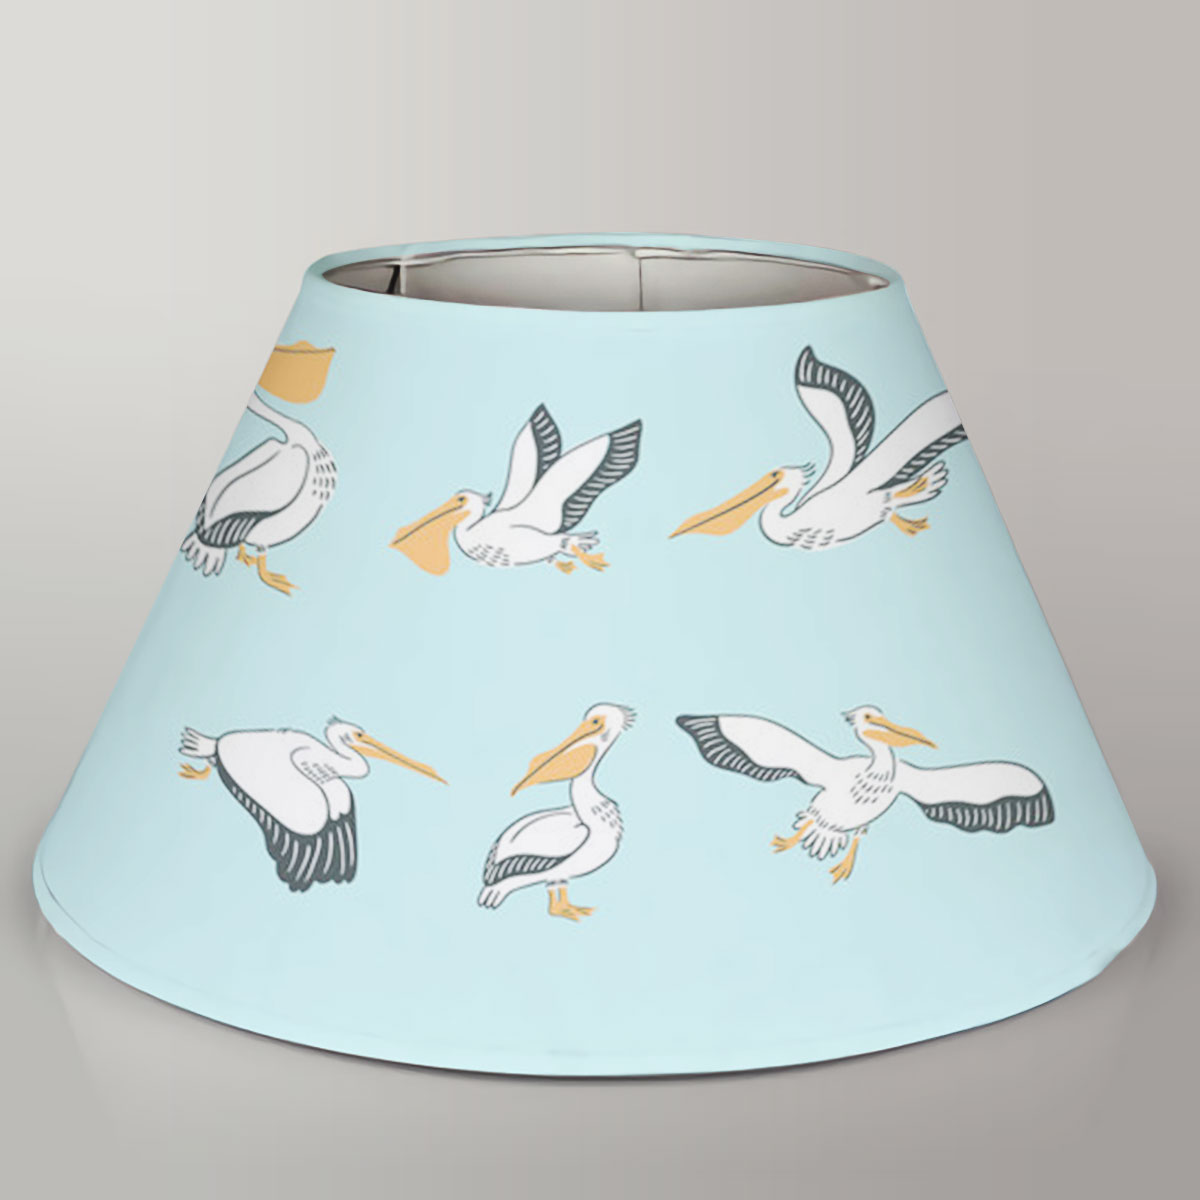 Positions Pelicans Coon Lamp Cover